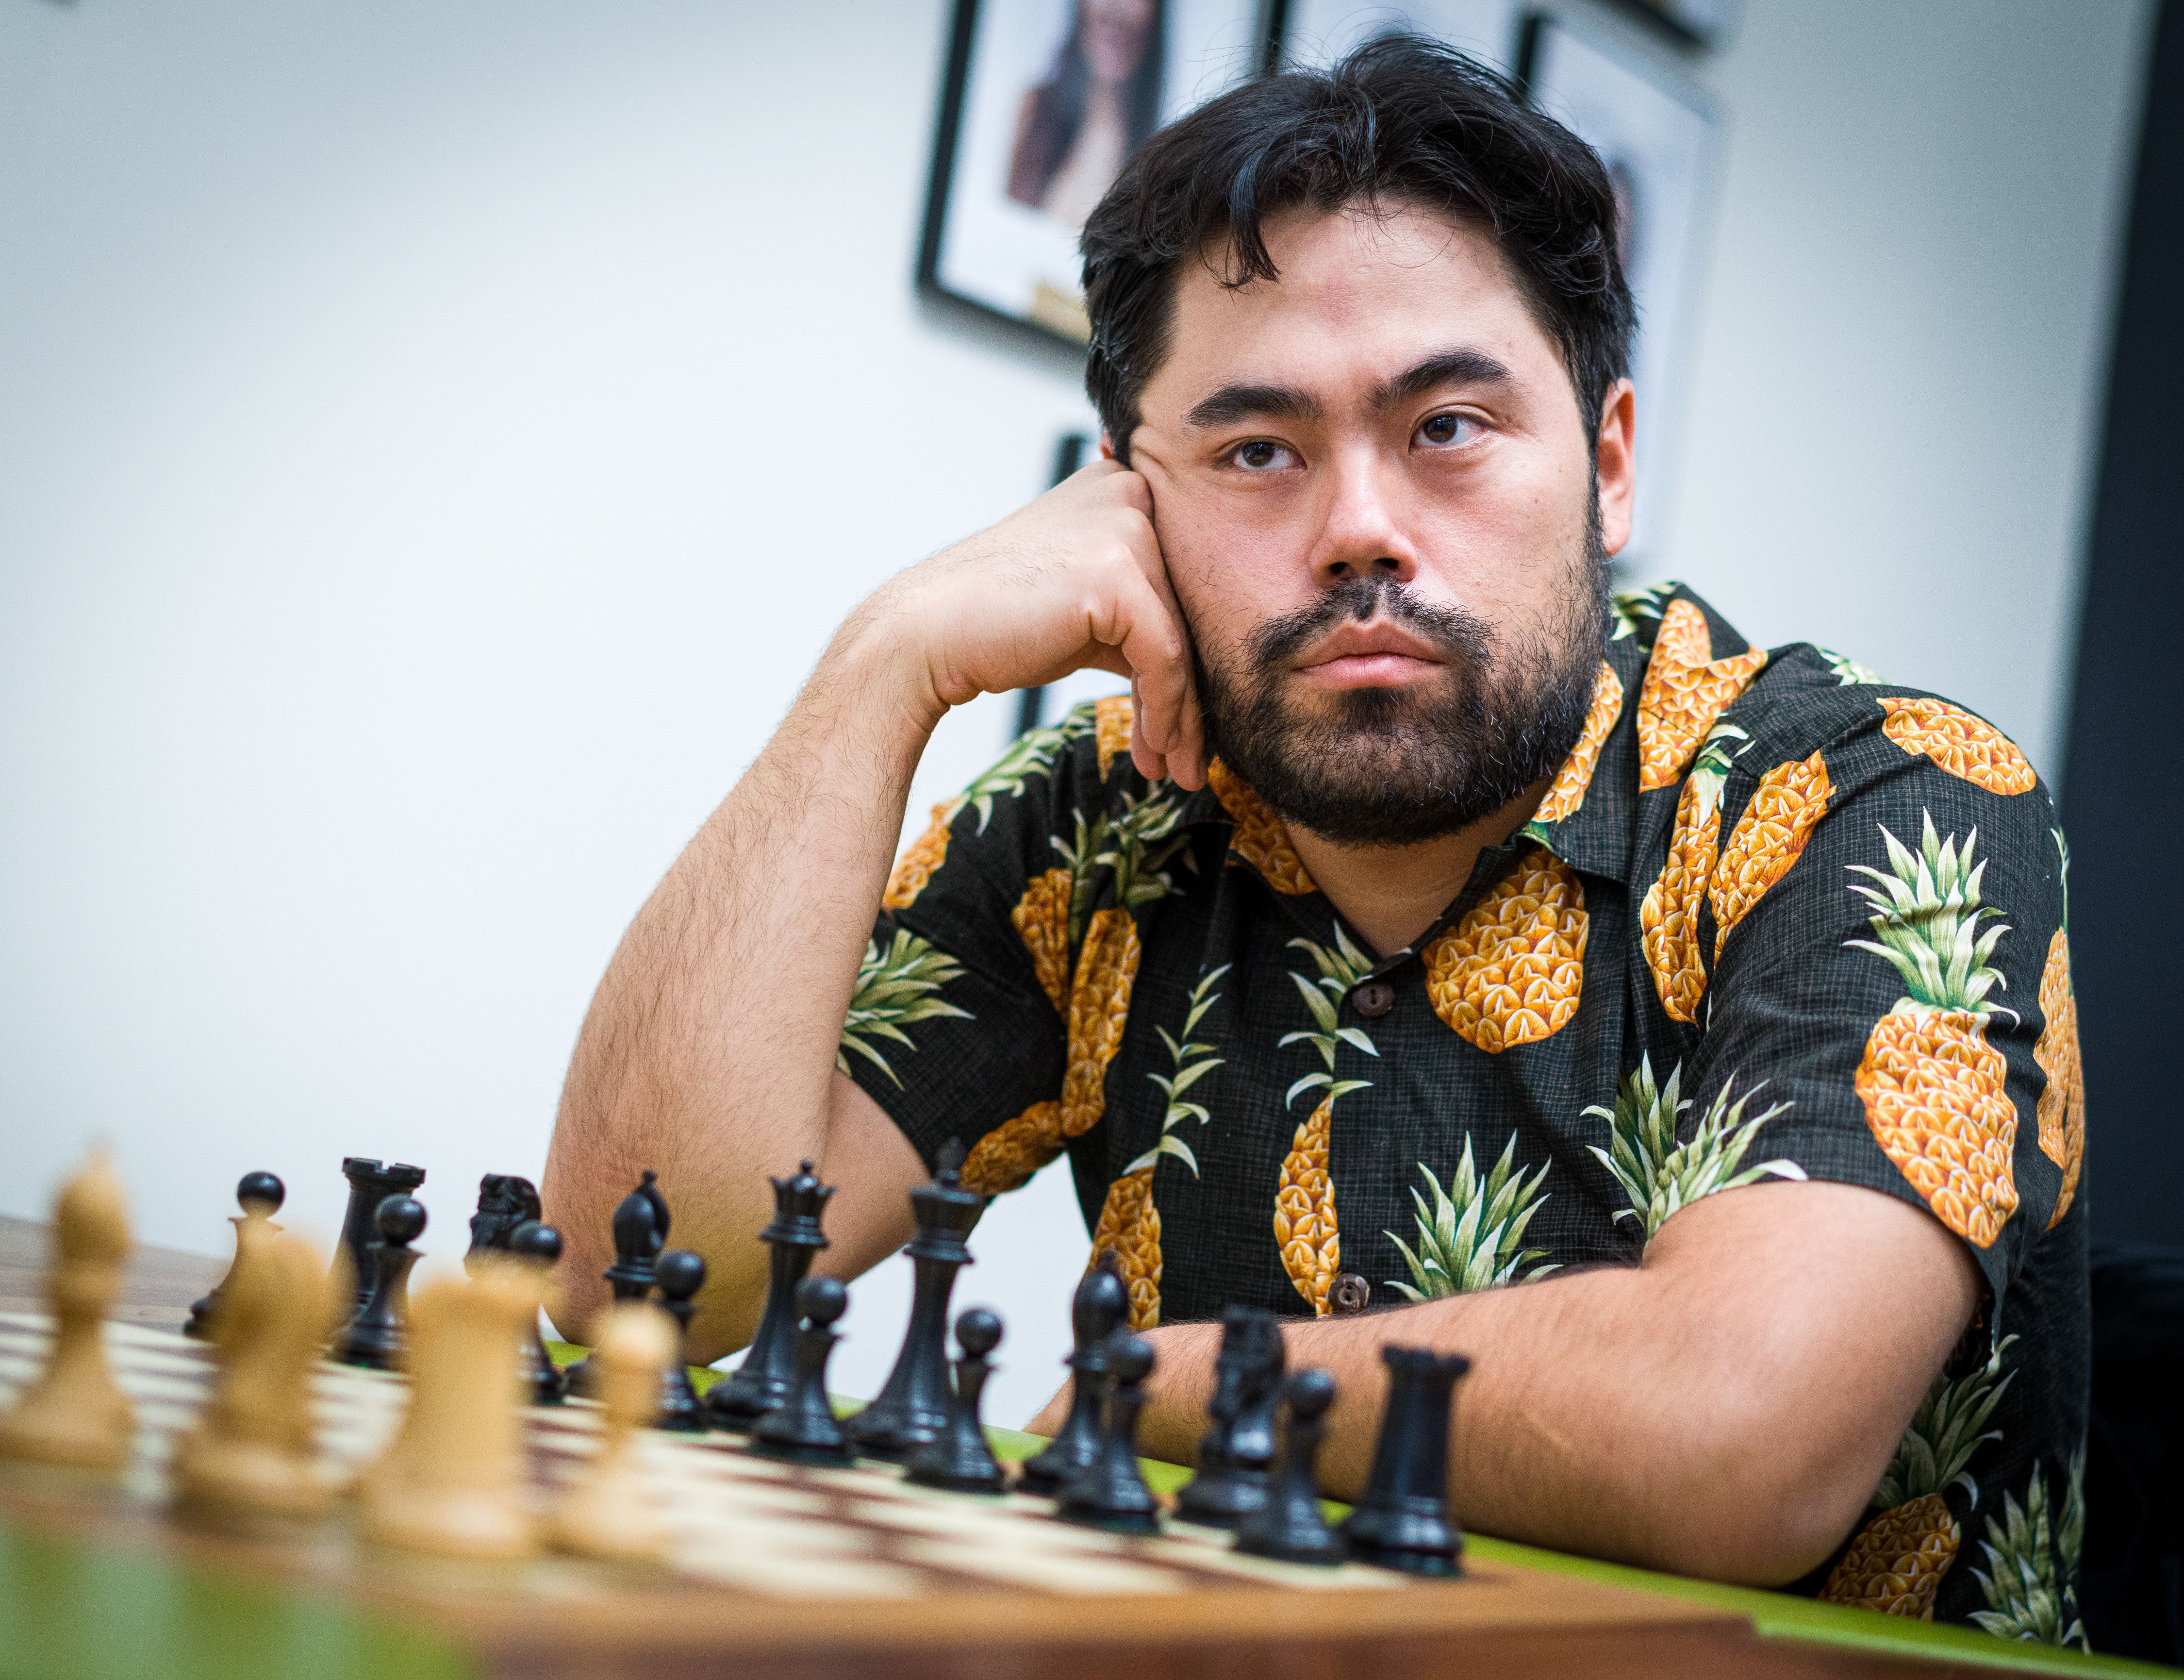 Hikaru gains 42 Elo after beating Duda 4-0, recovers position to 2nd on FIDE's  Rapid rating list : r/chess